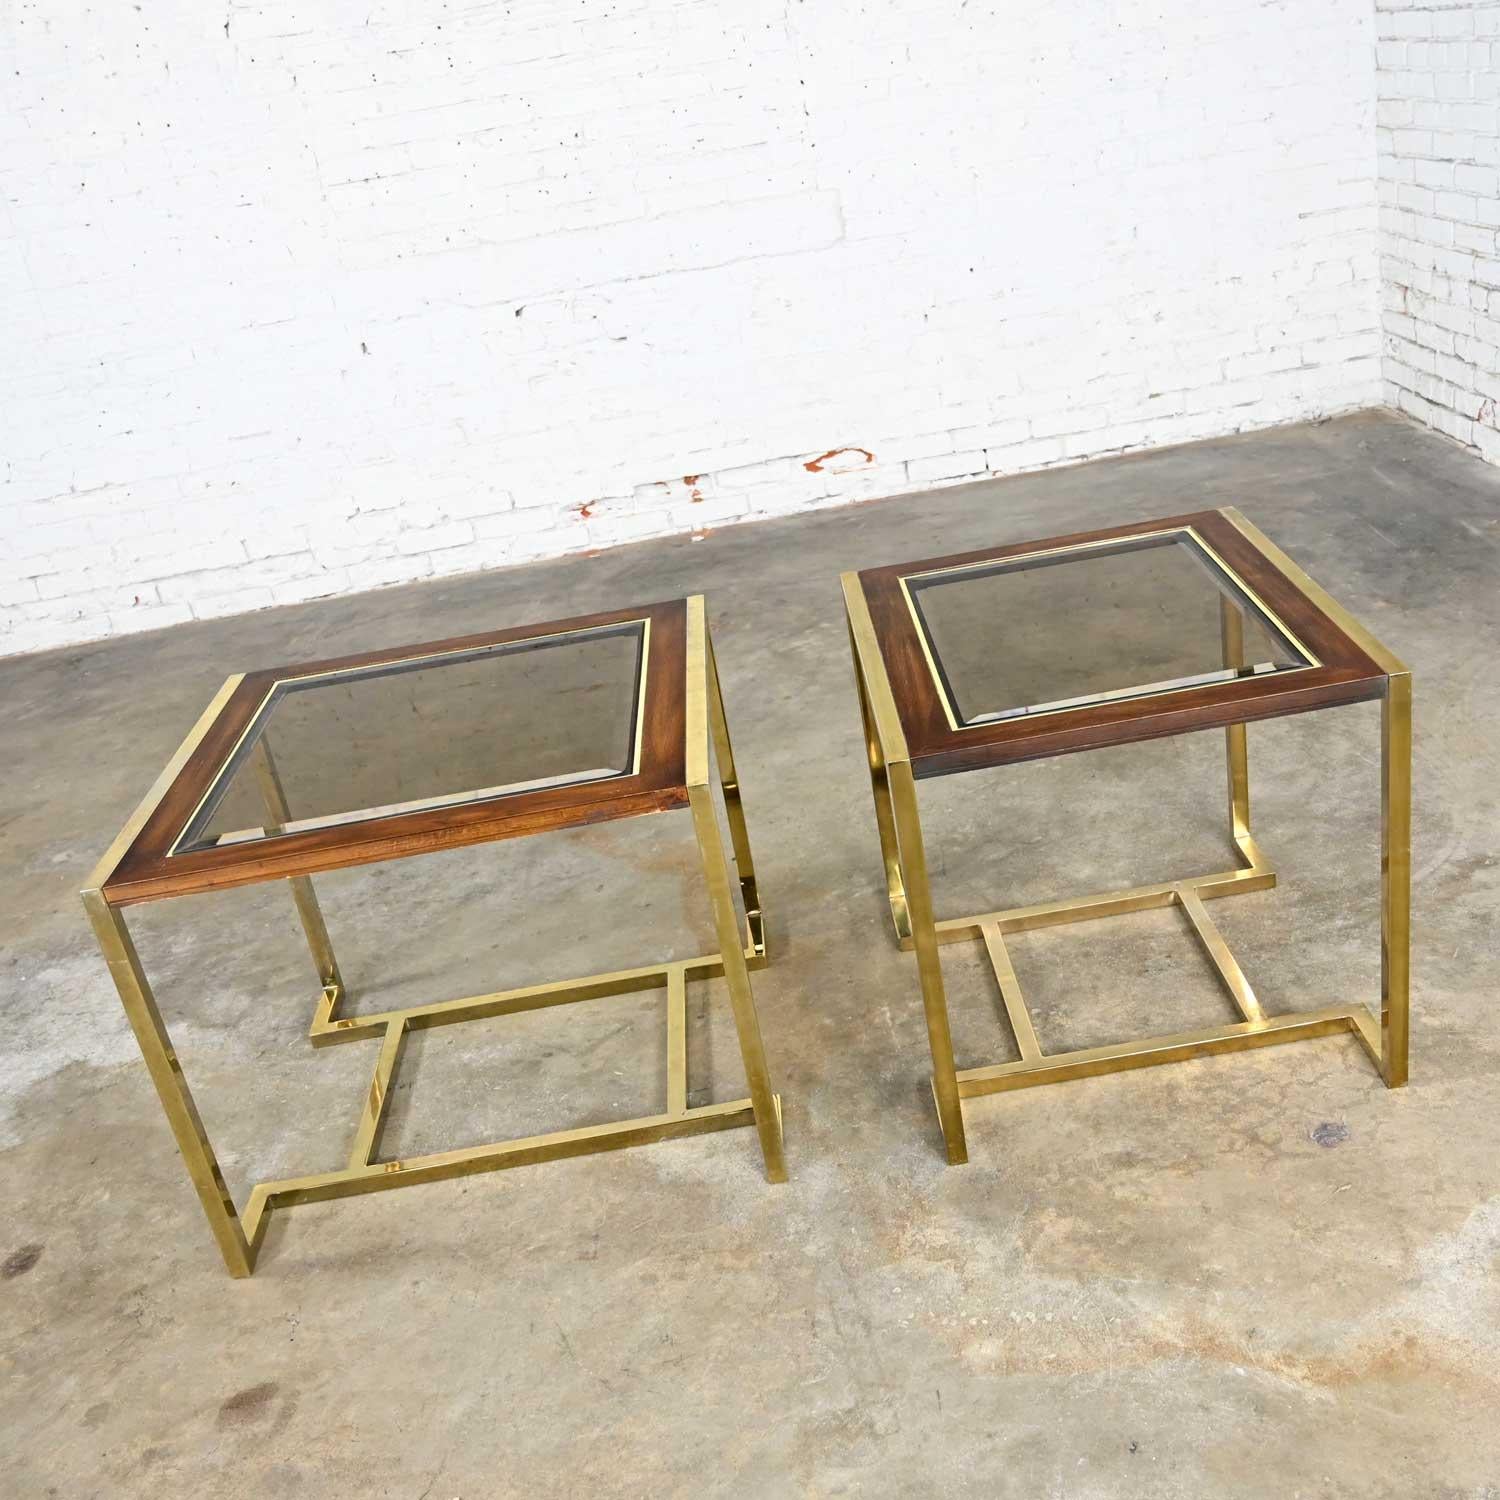 2 Brass Plated Wood & Glass End Tables by Thomasville Furn Style Milo Baughman For Sale 1